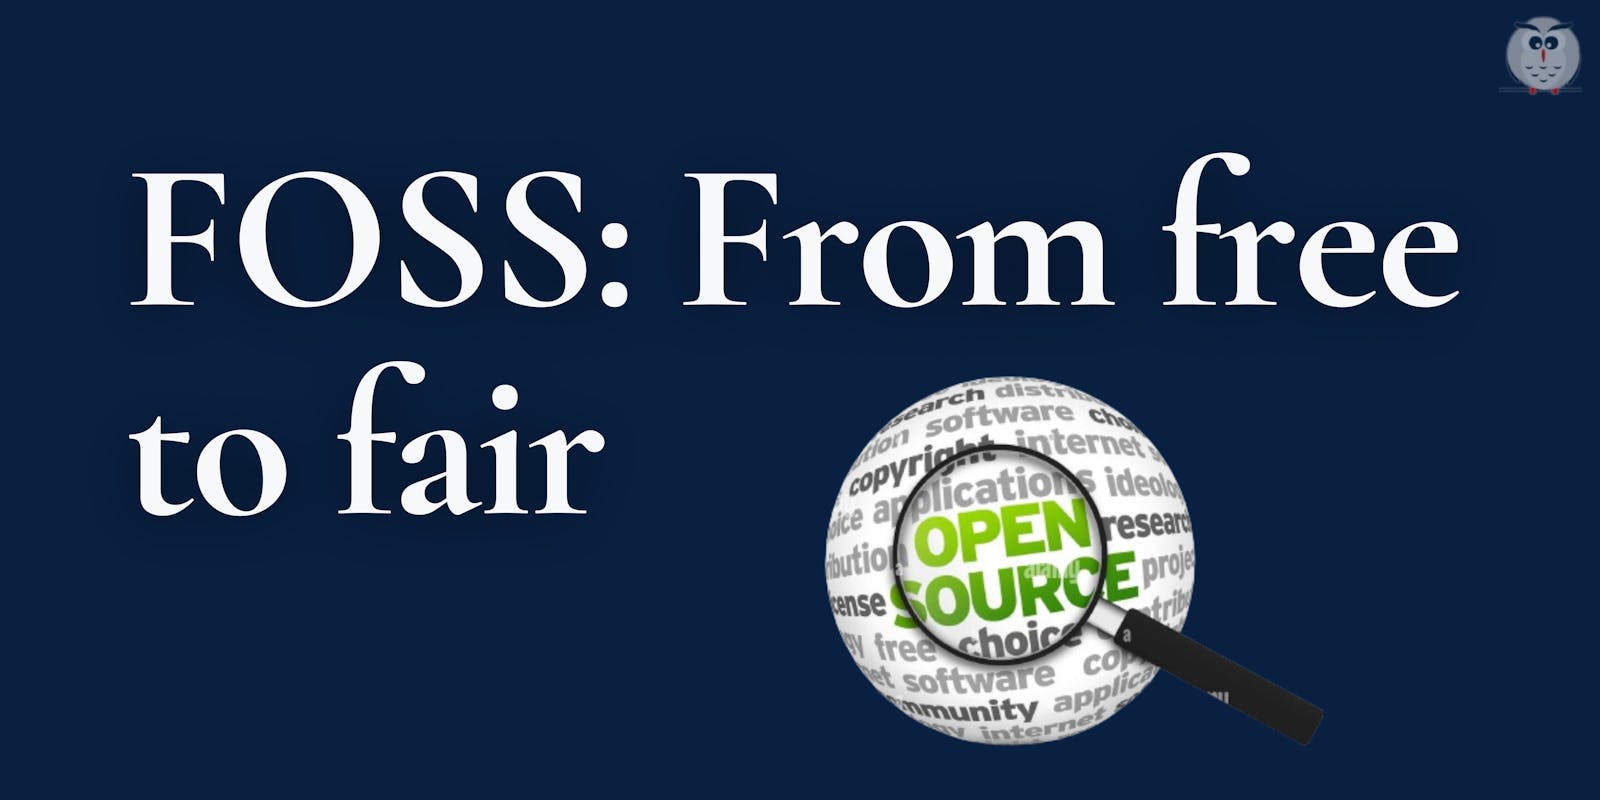 FOSS: from Free to Fair